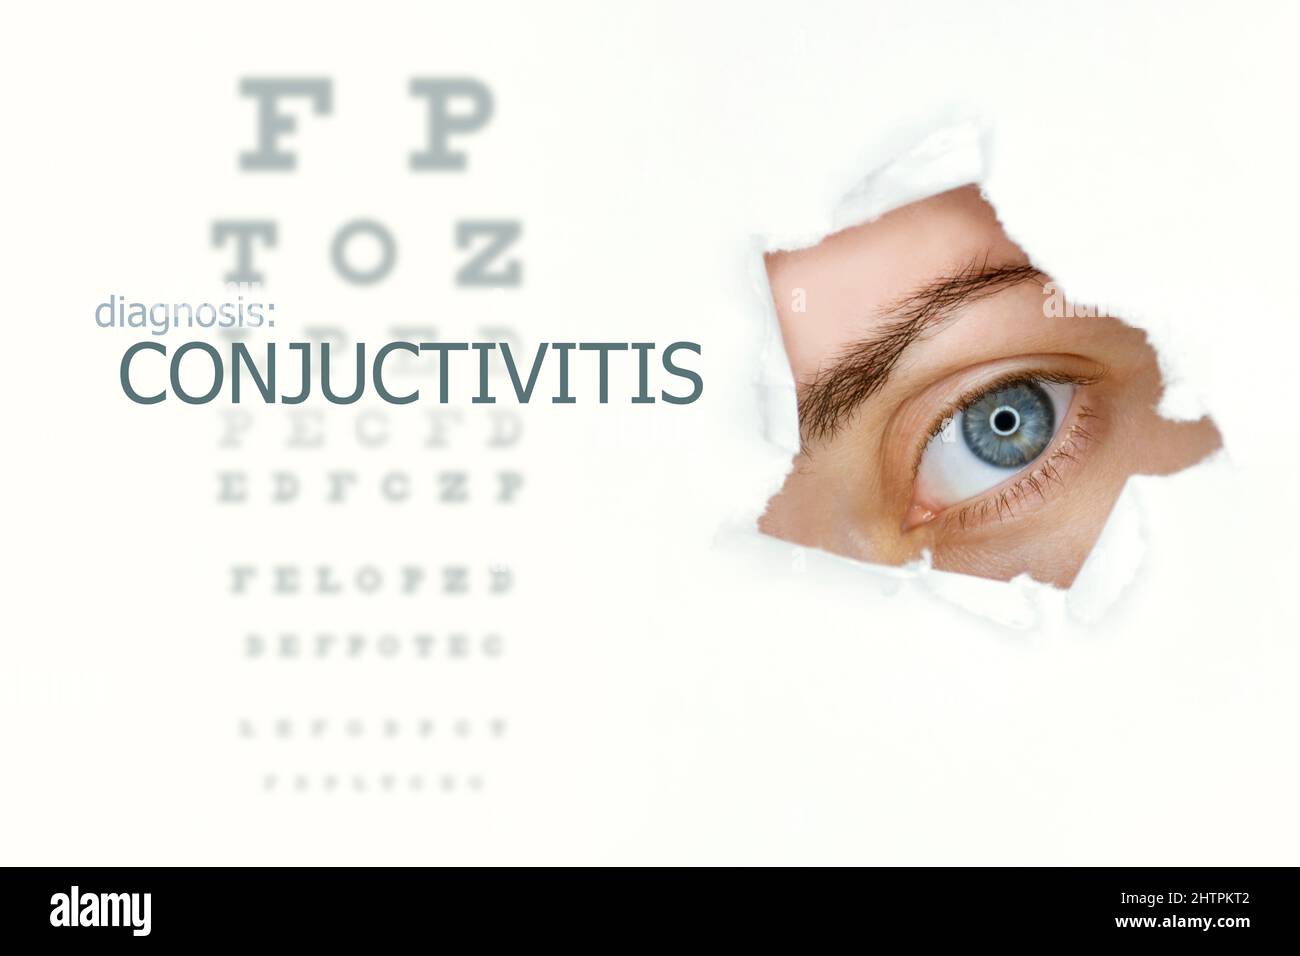 Conjuctivitis disease poster with eye test chart and blue eye. Isolated on white Stock Photo